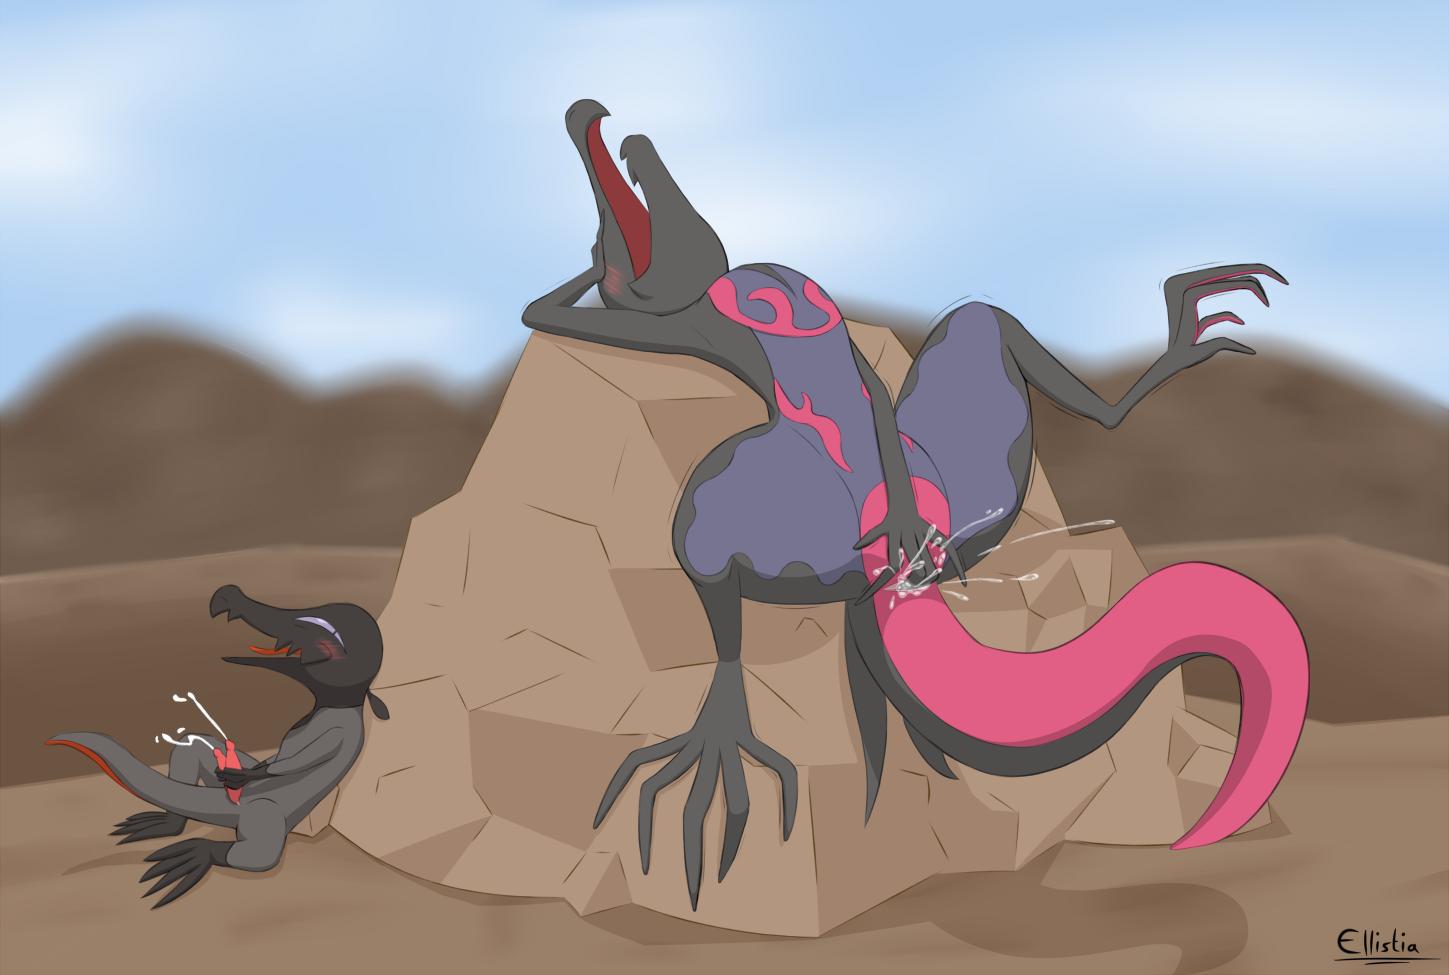 “Some old horny lizard art 💦
That Salazzle sure don't need...